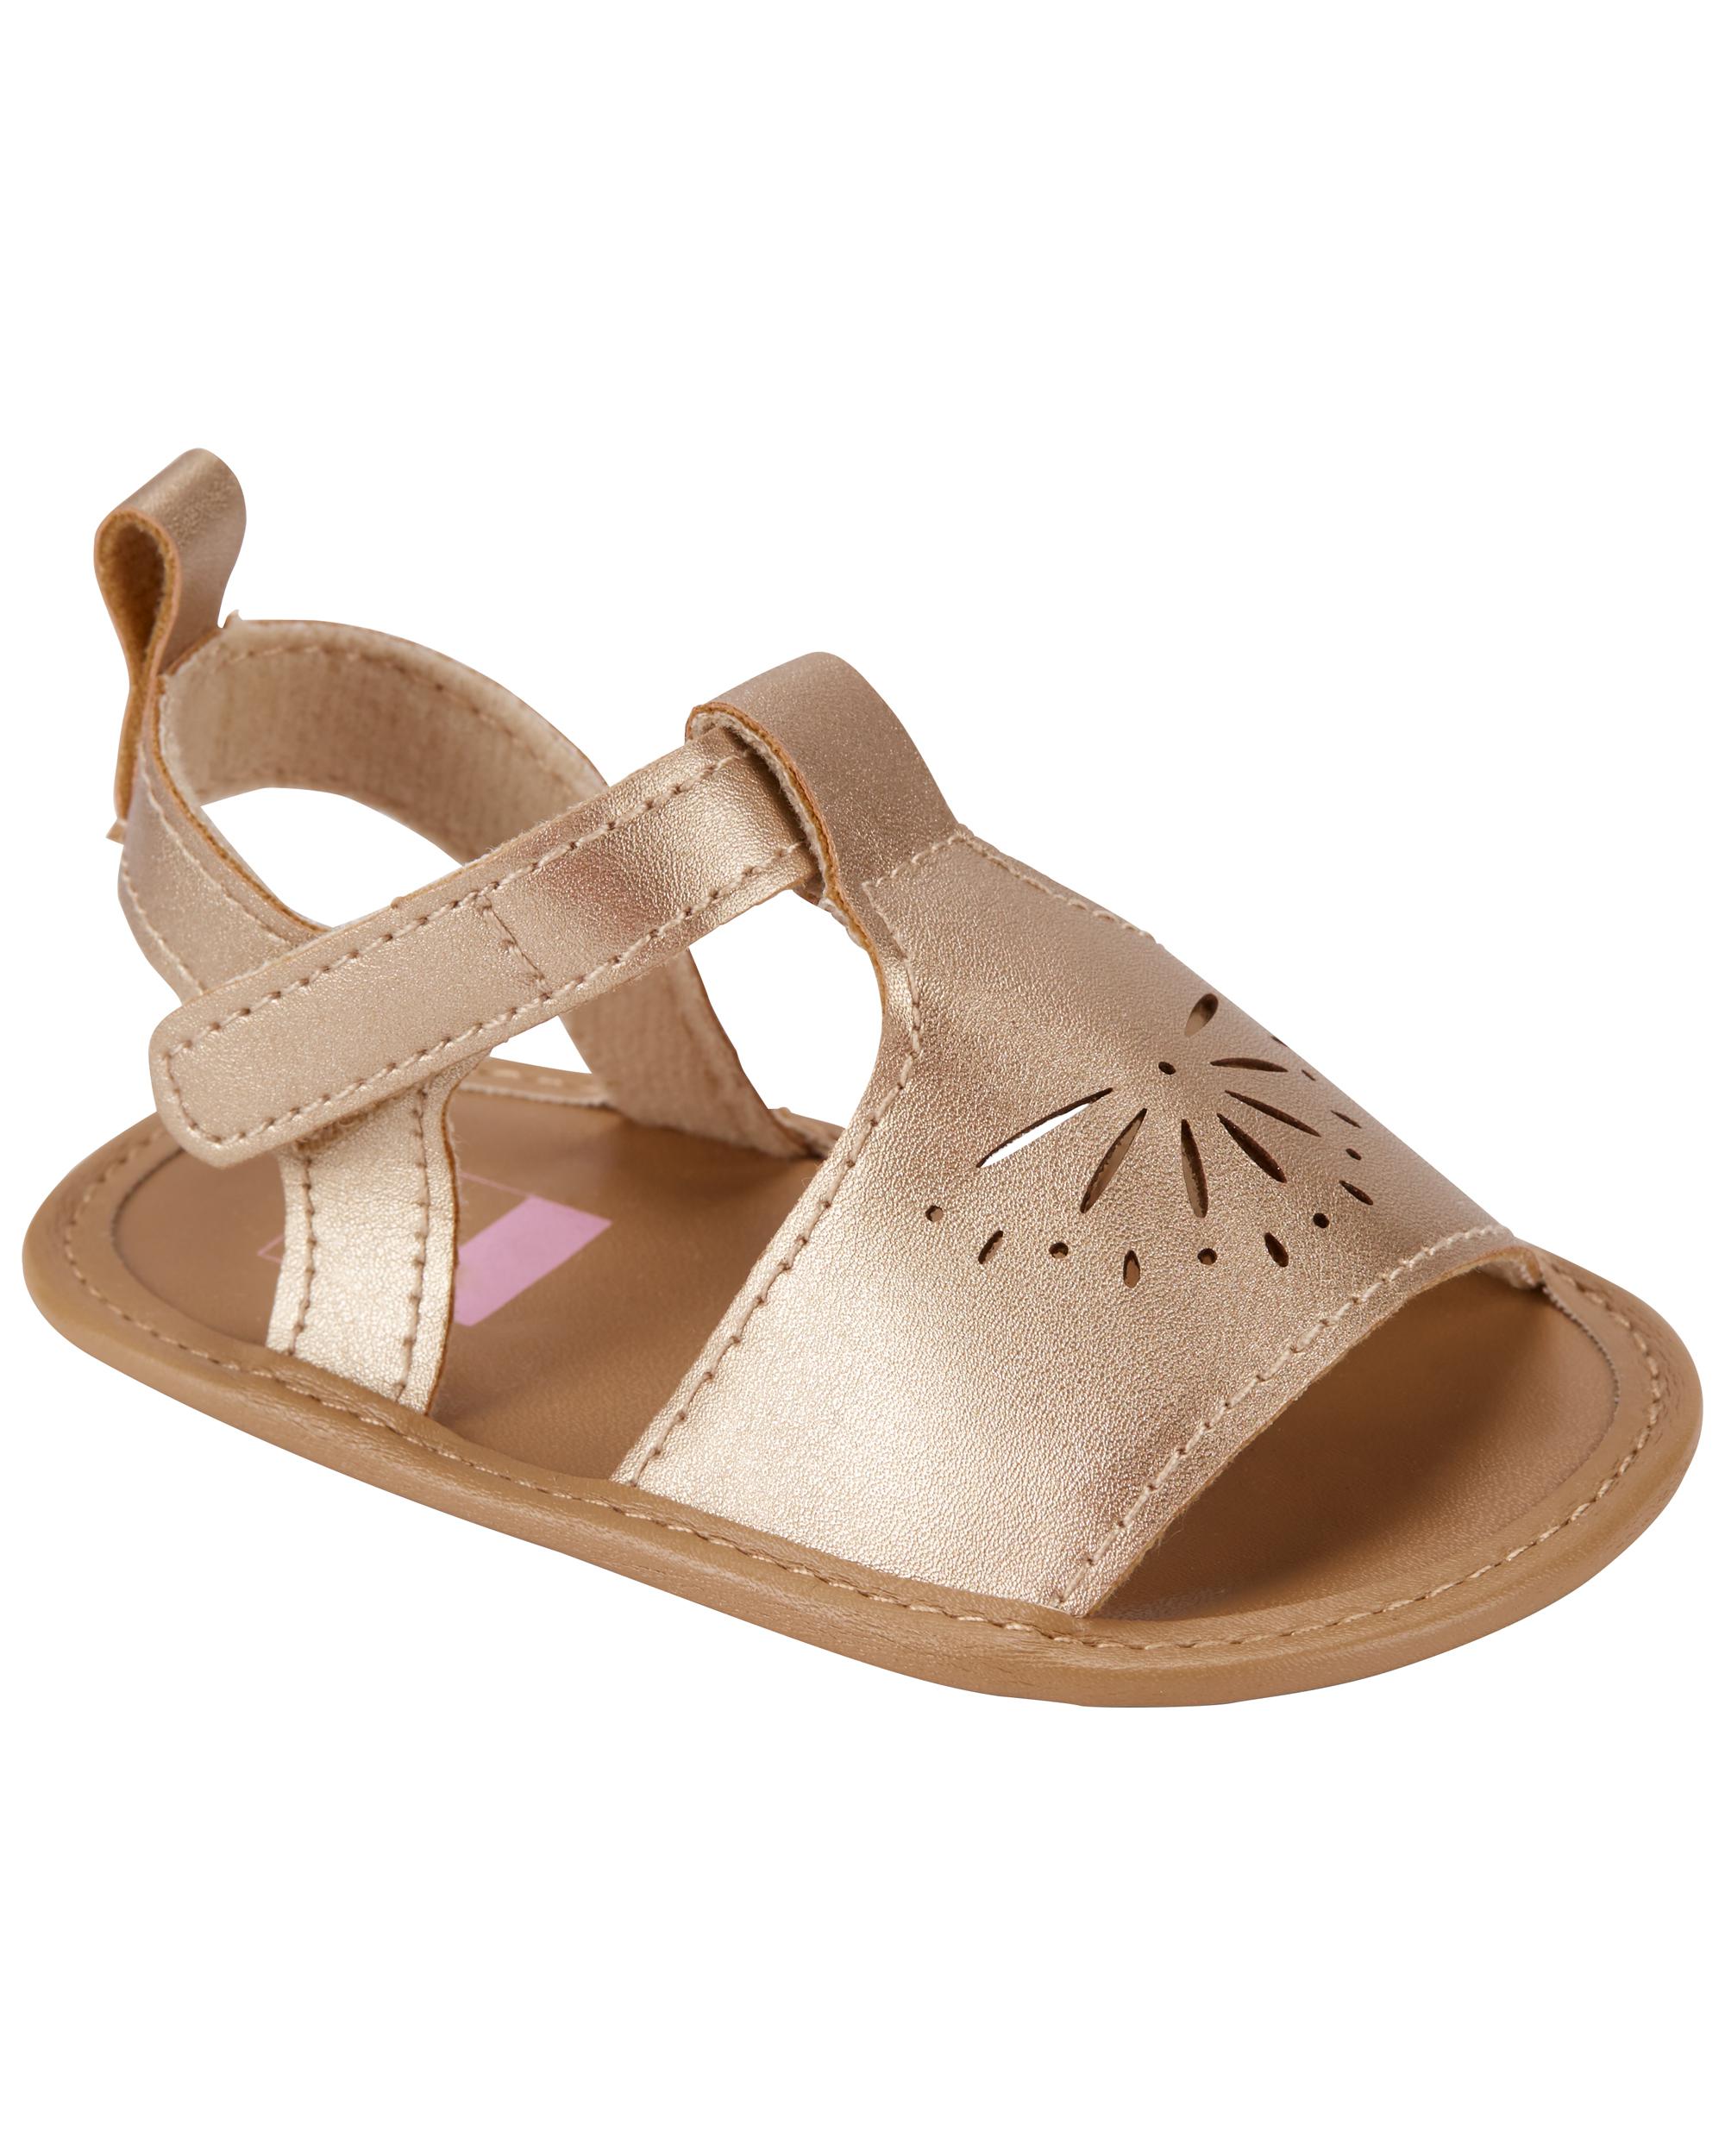 Baby Sandal Shoes